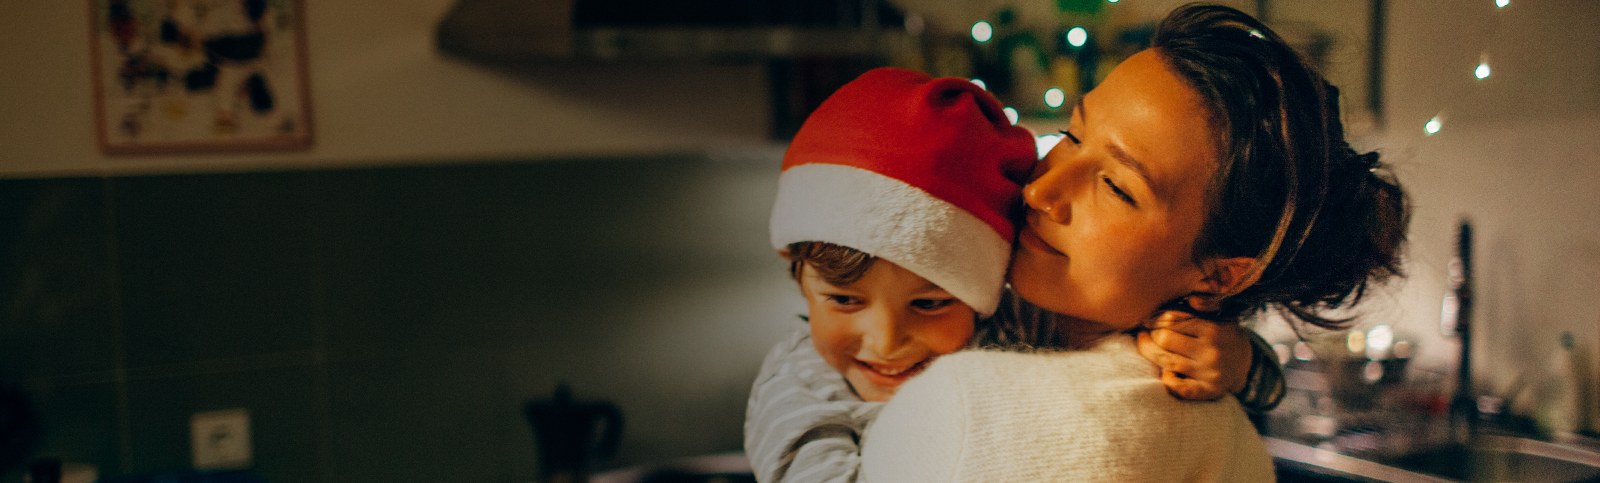 Son wearing Santa hat and hugging mom while standing in front of lights